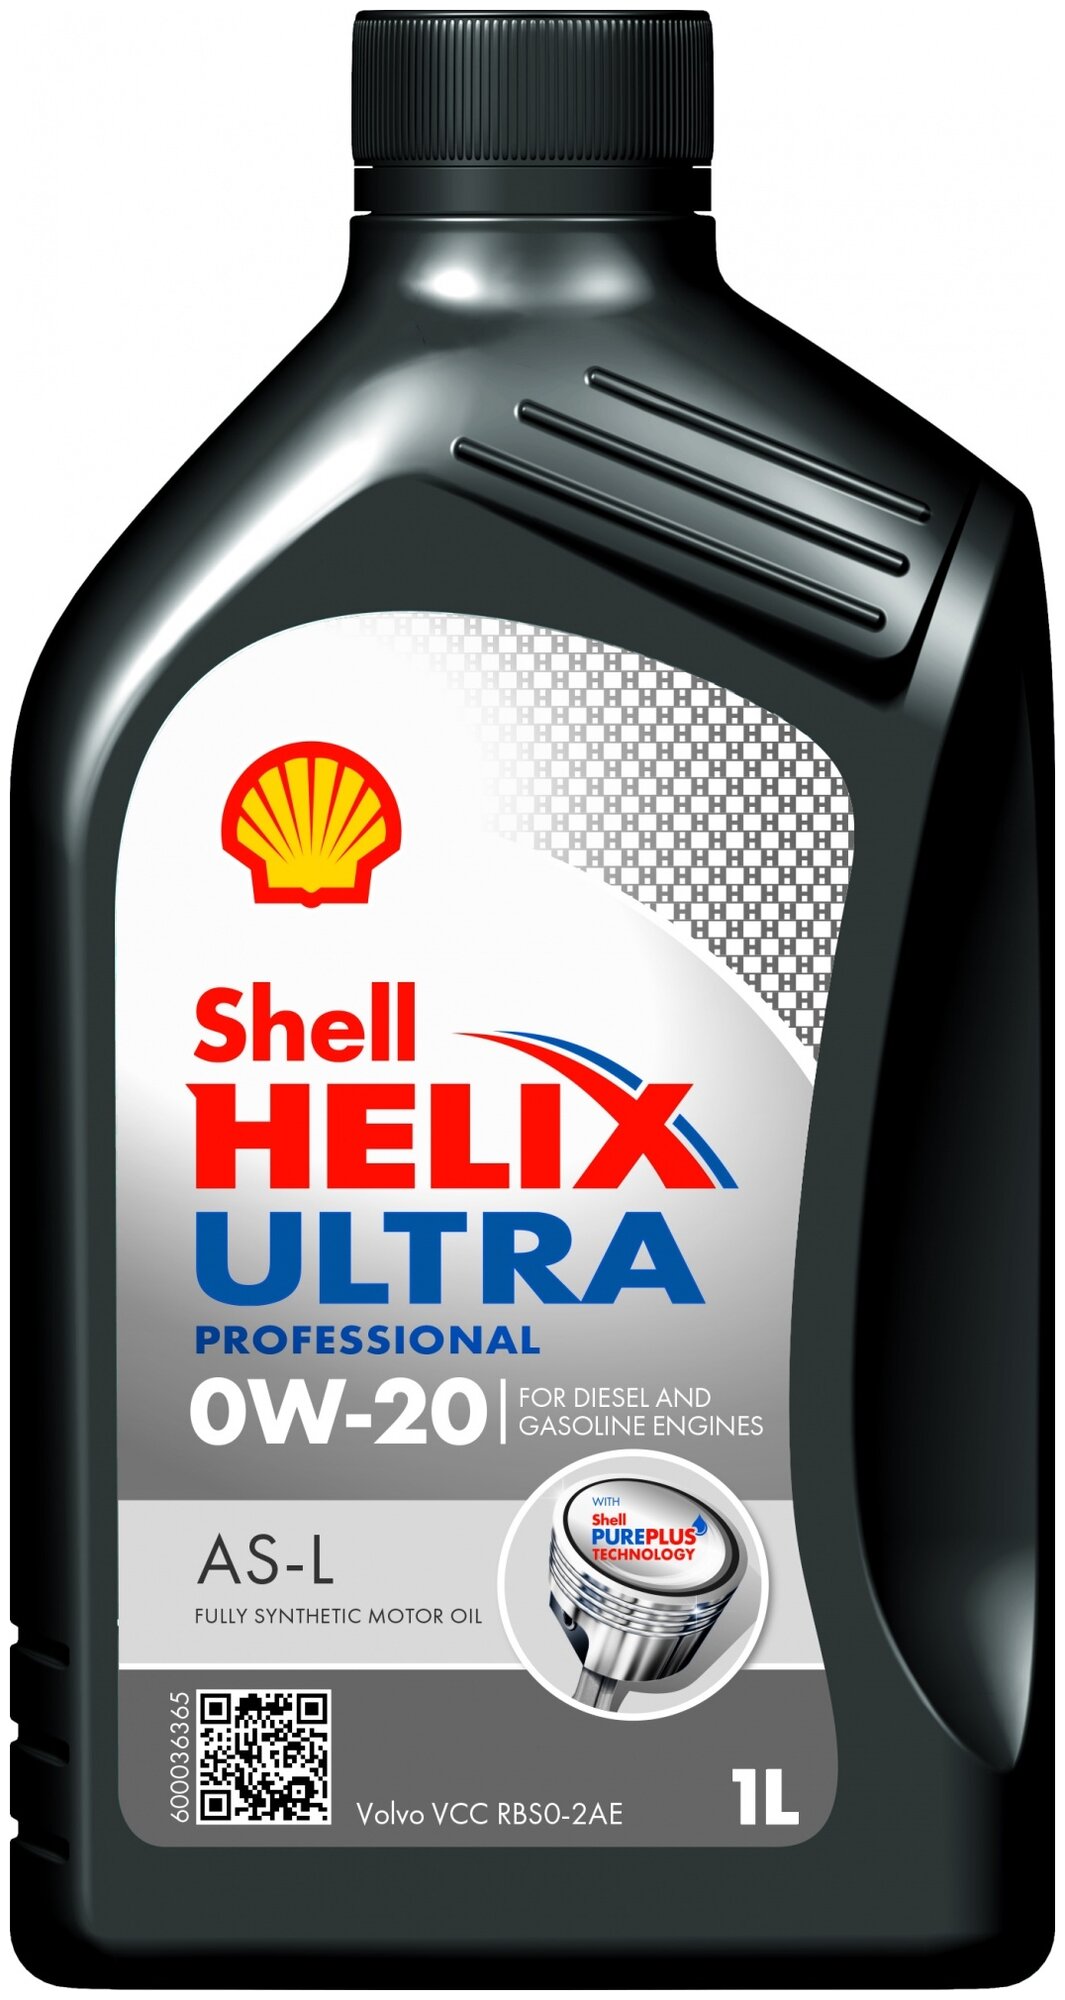 SHELL 550055735 Масло моторное Shell Helix Ultra Prof AS-L 0W-20, ACEA C5, VCC RBS0-2AE, 1L